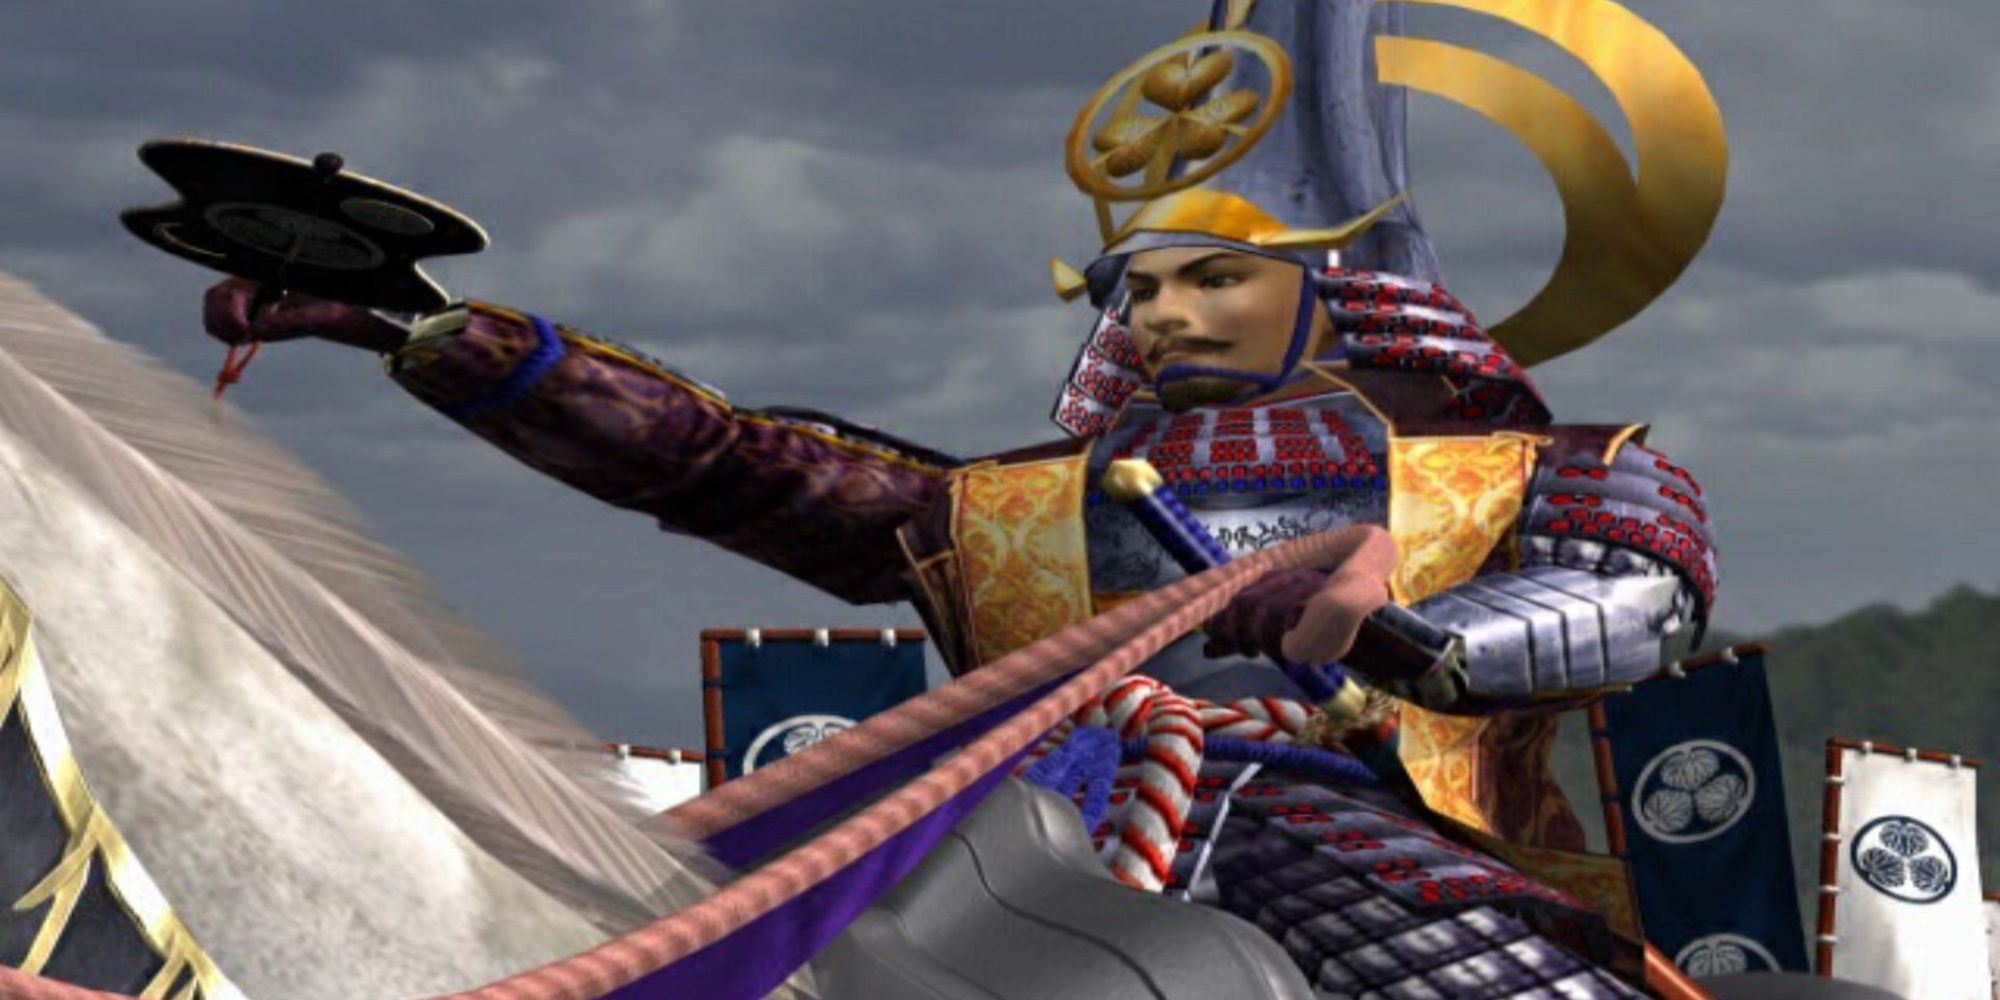 Close-up of a samurai on a horse giving a command to the army, bannermen seen behind the character.